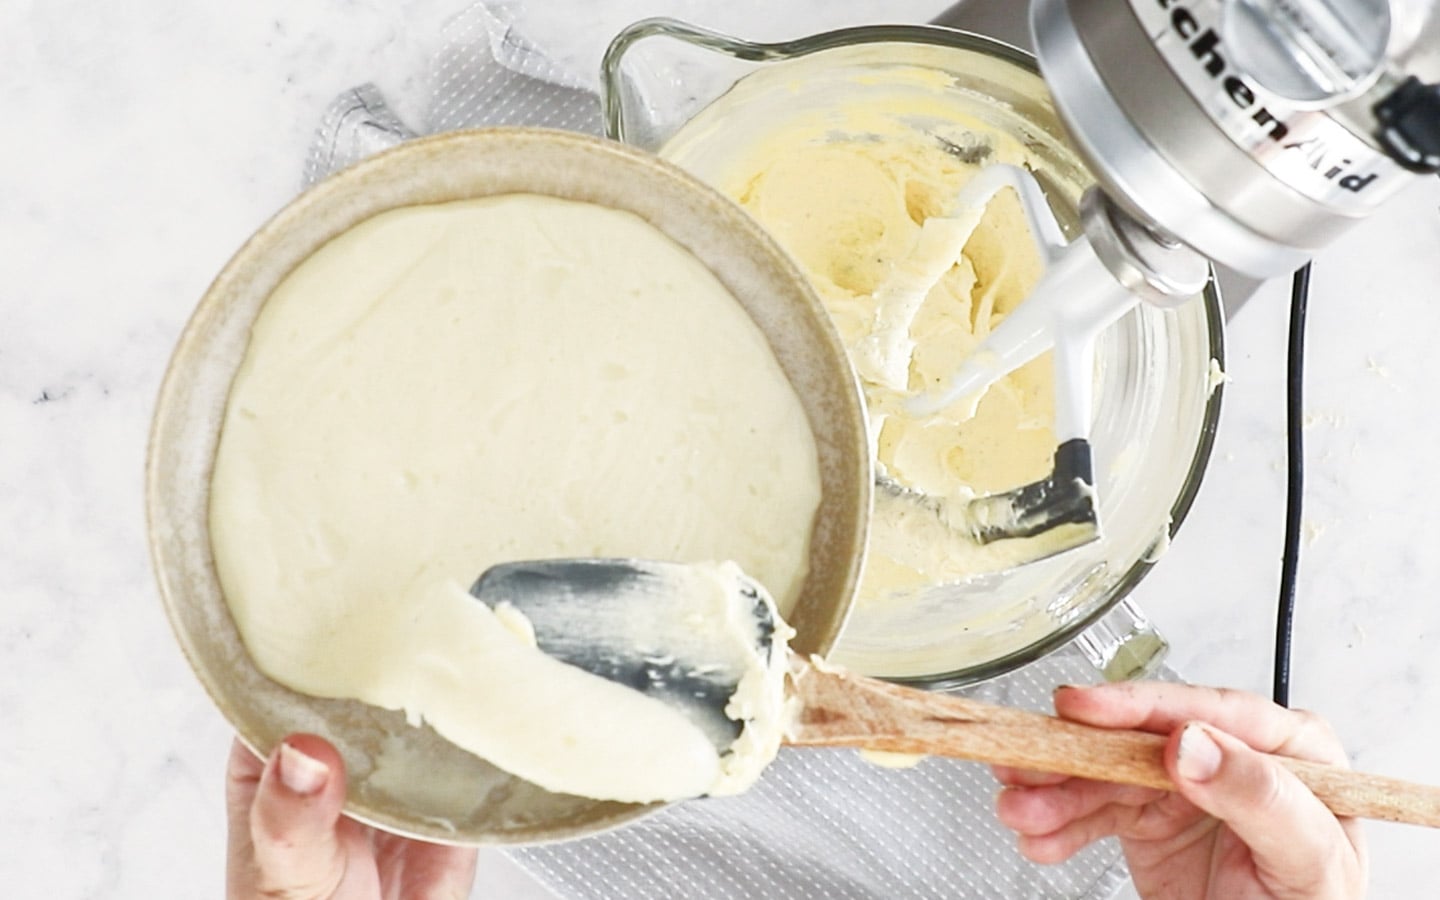 Adding flour and milk pudding to butter in a mixer.